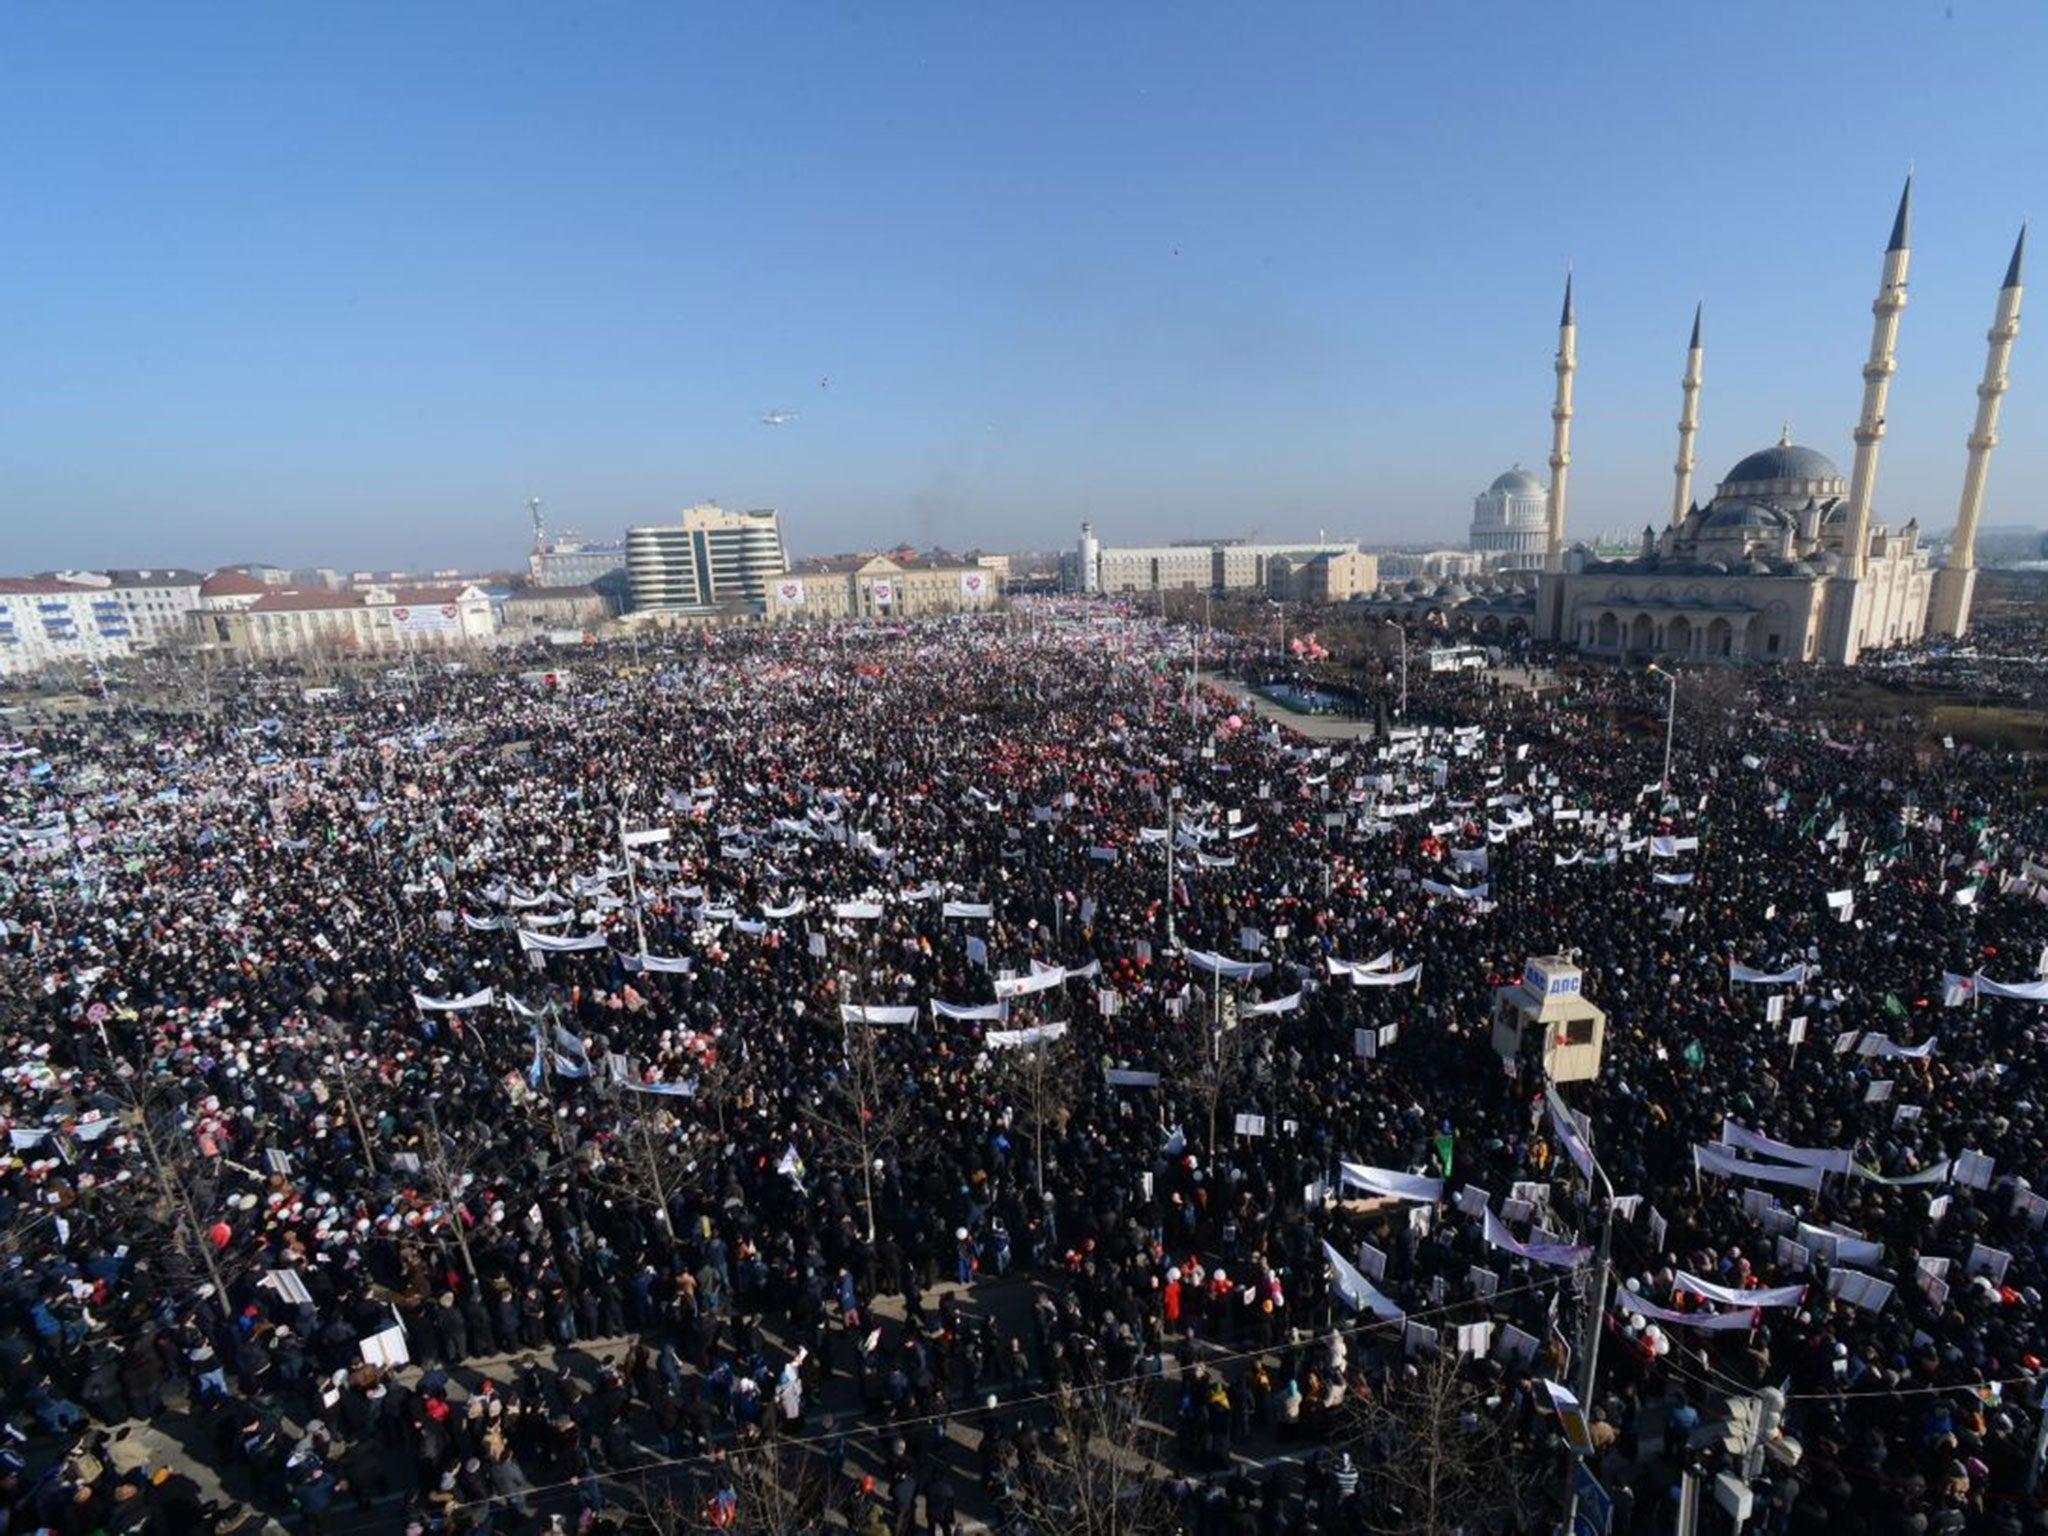 People attend a state-organised rally against the publication of cartoons of the Prophet Mohamed by Charlie Hebdo in the Chechen capital Grozny on 19 January